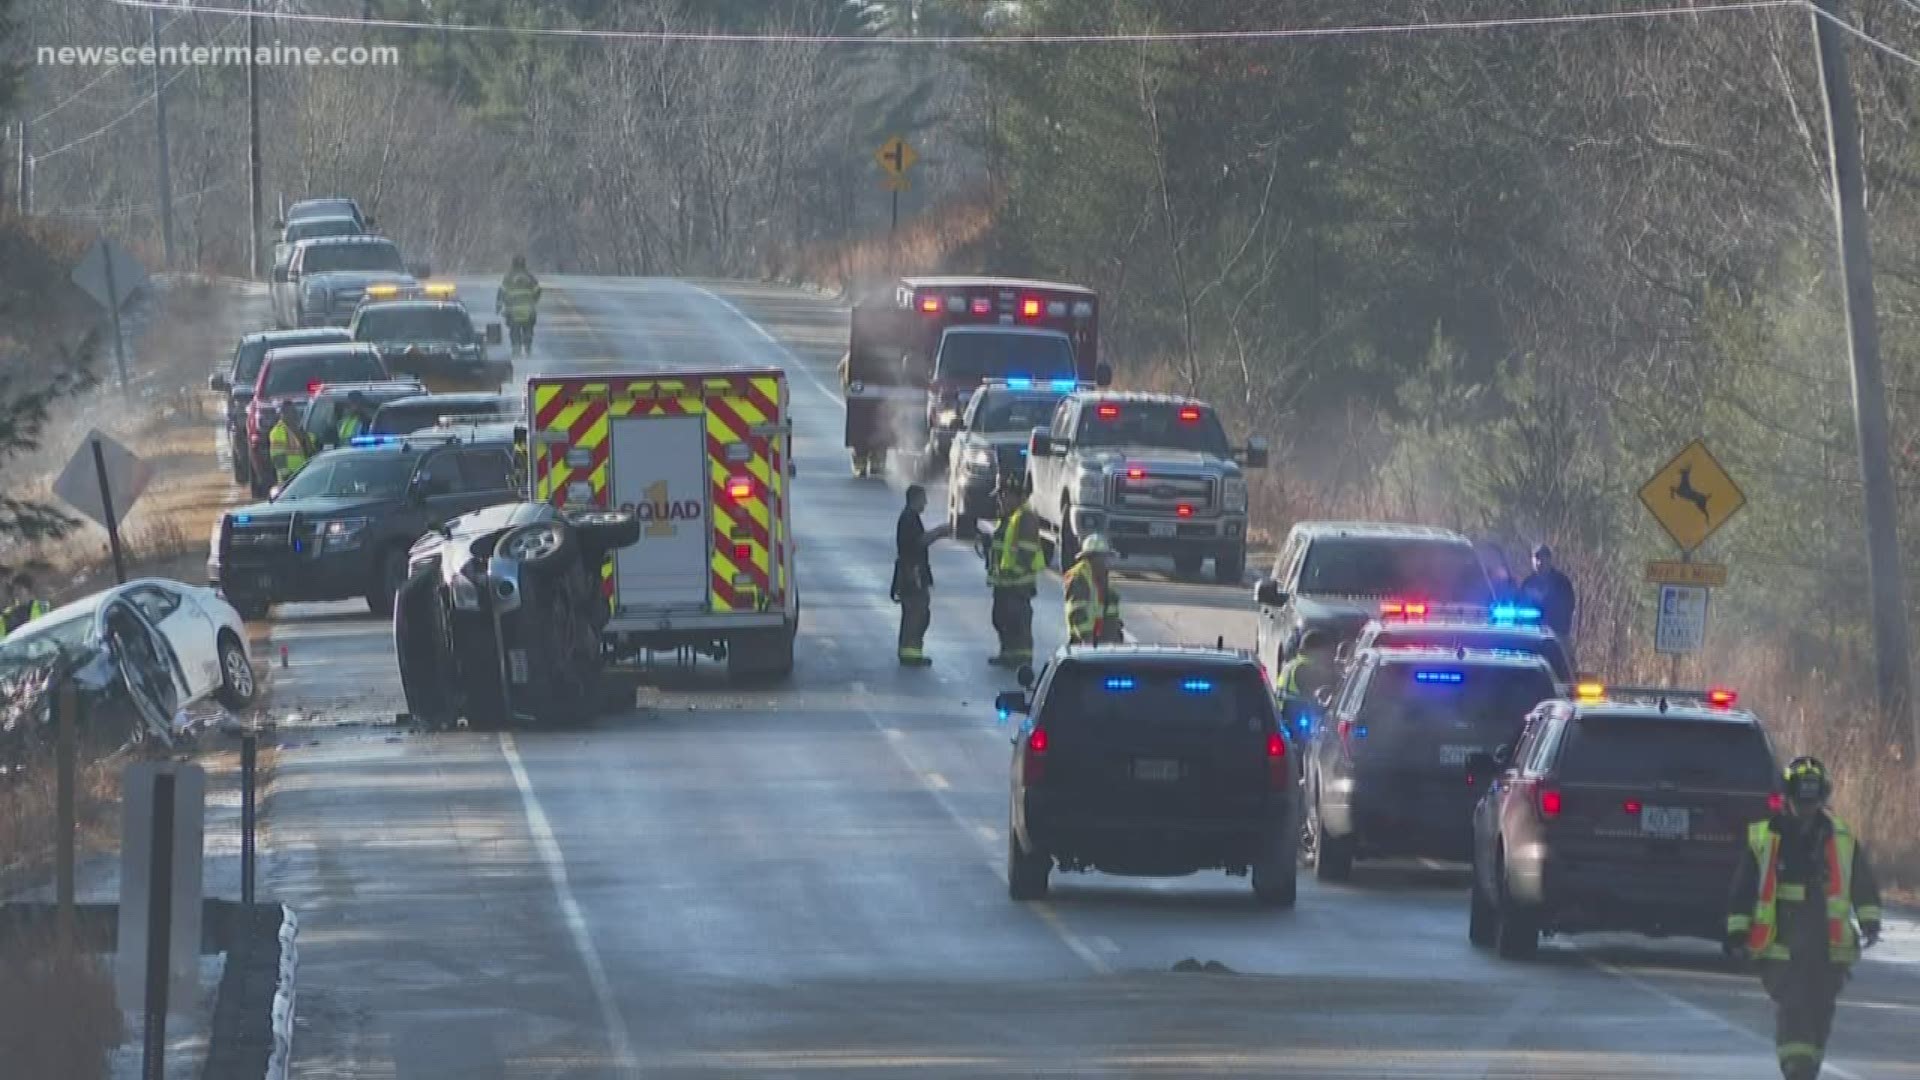 New details emerge in deadly Standish crash